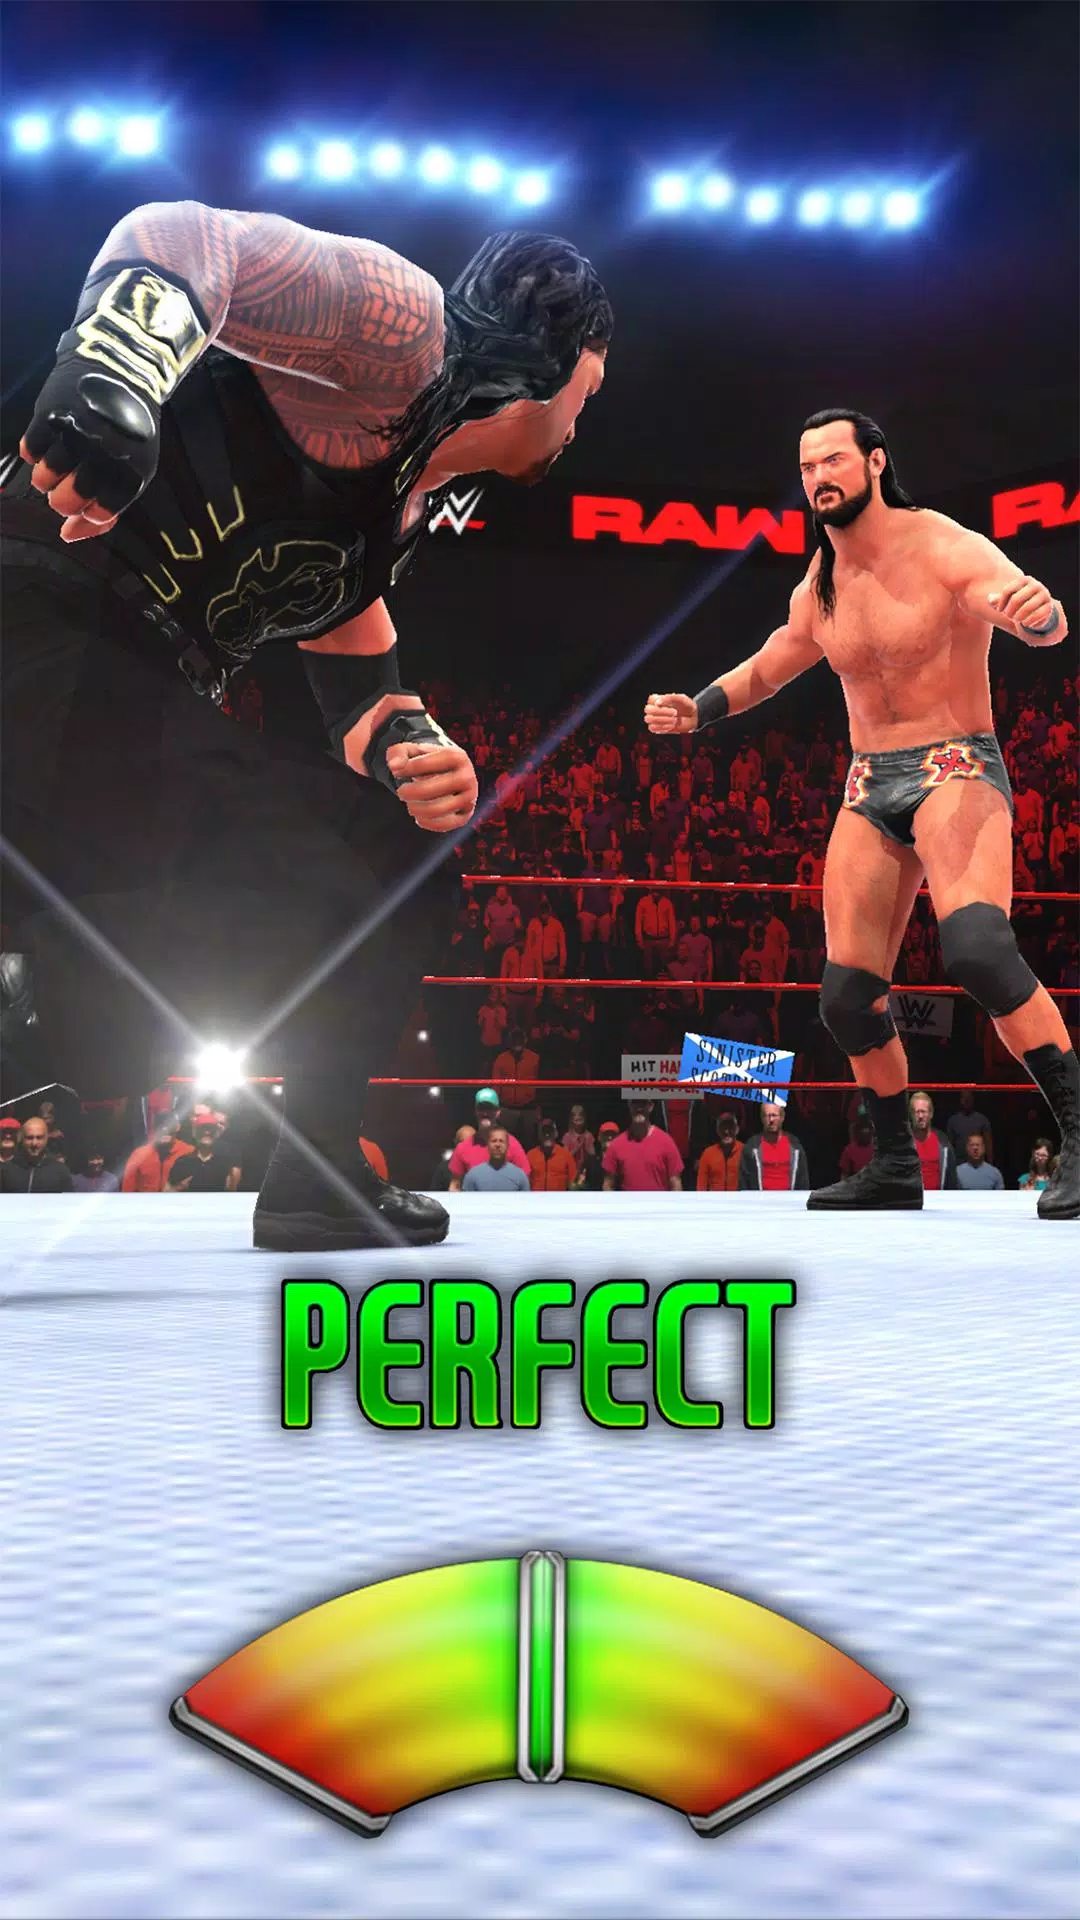 WWE UNIVERSE for Android - Download the APK from Uptodown